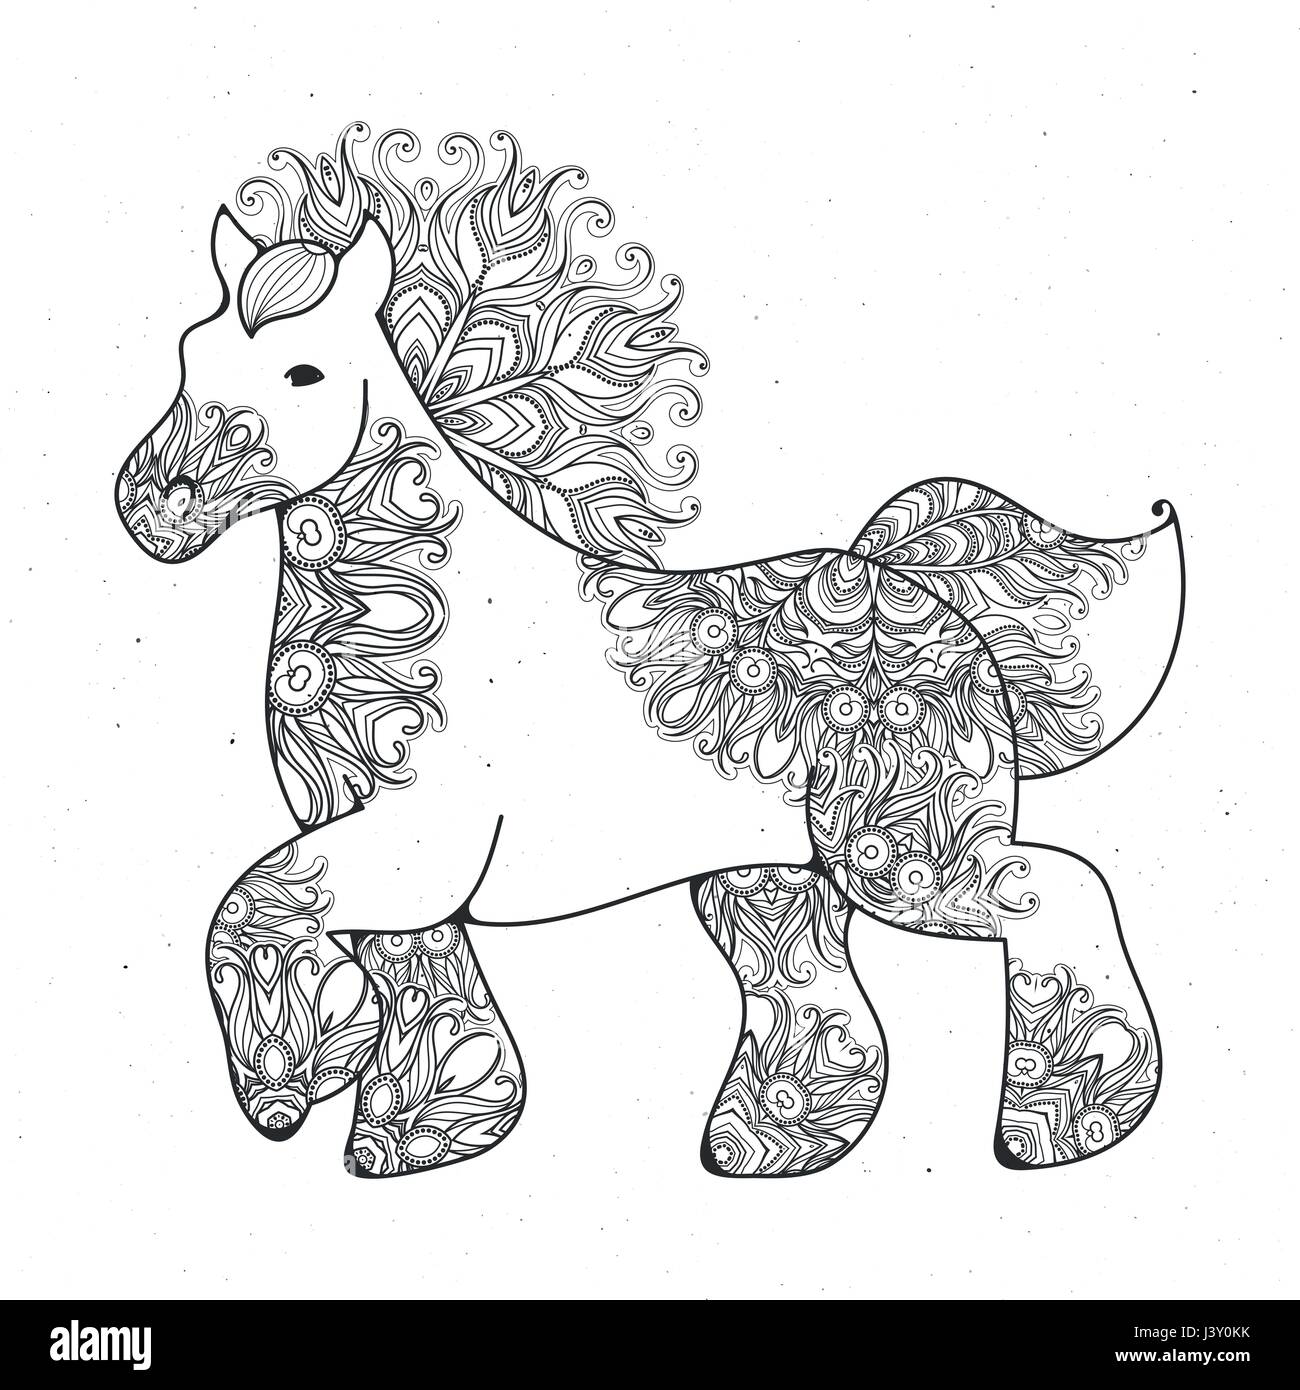 Antistress linear page with horse. Zentangle animal for colouring book, greeting card, mandala decoration element, art therapy. Stock Vector